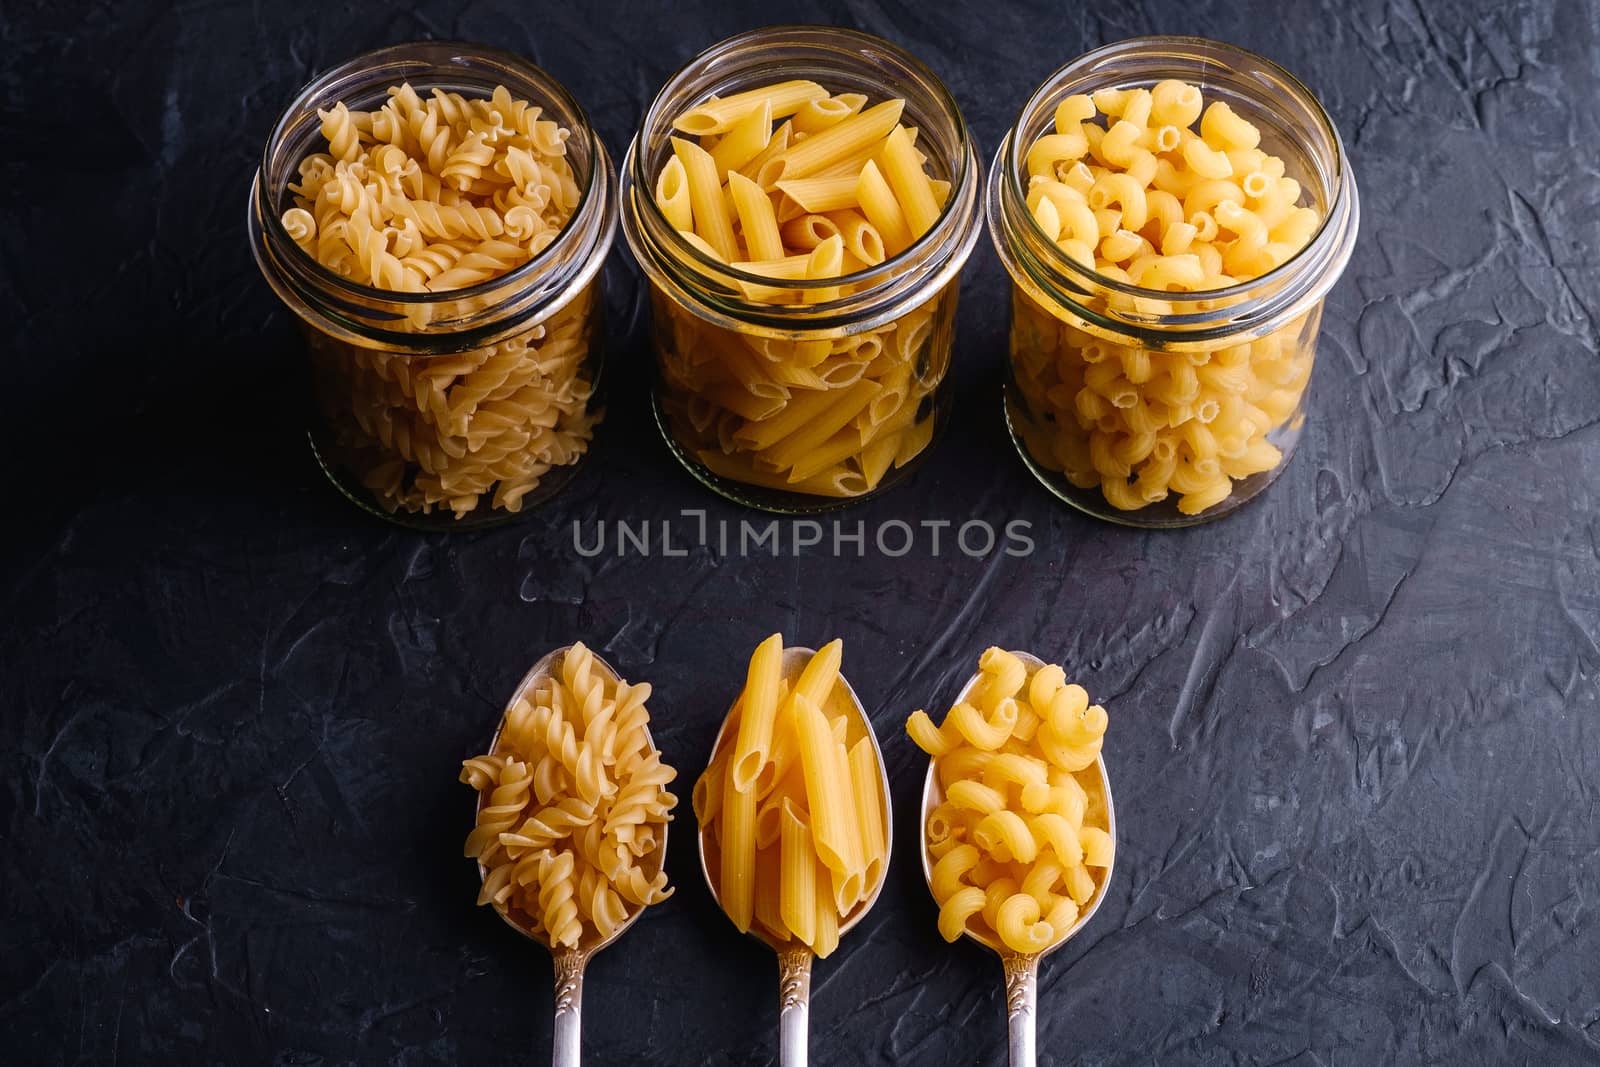 Three cutlery spoons and glass jars with variety of uncooked golden wheat pasta on dark black textured background, angle view